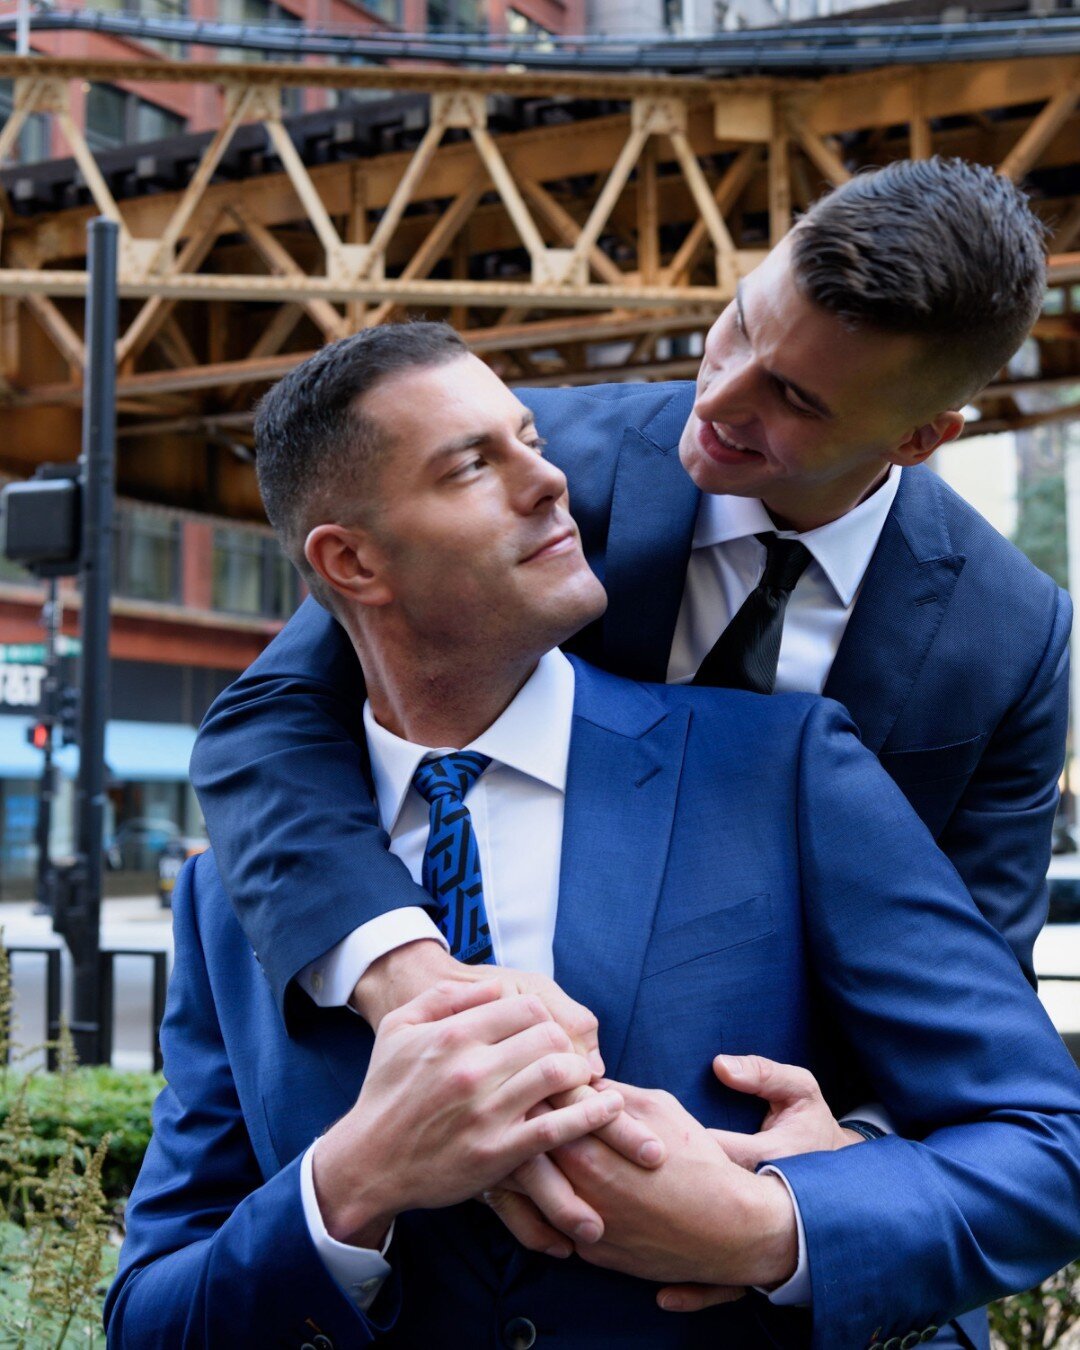 Kieran and Connor wearing complimentary blue two piece suits for their big day! 💍 
#bespoke #menswear #groom #mensfashion